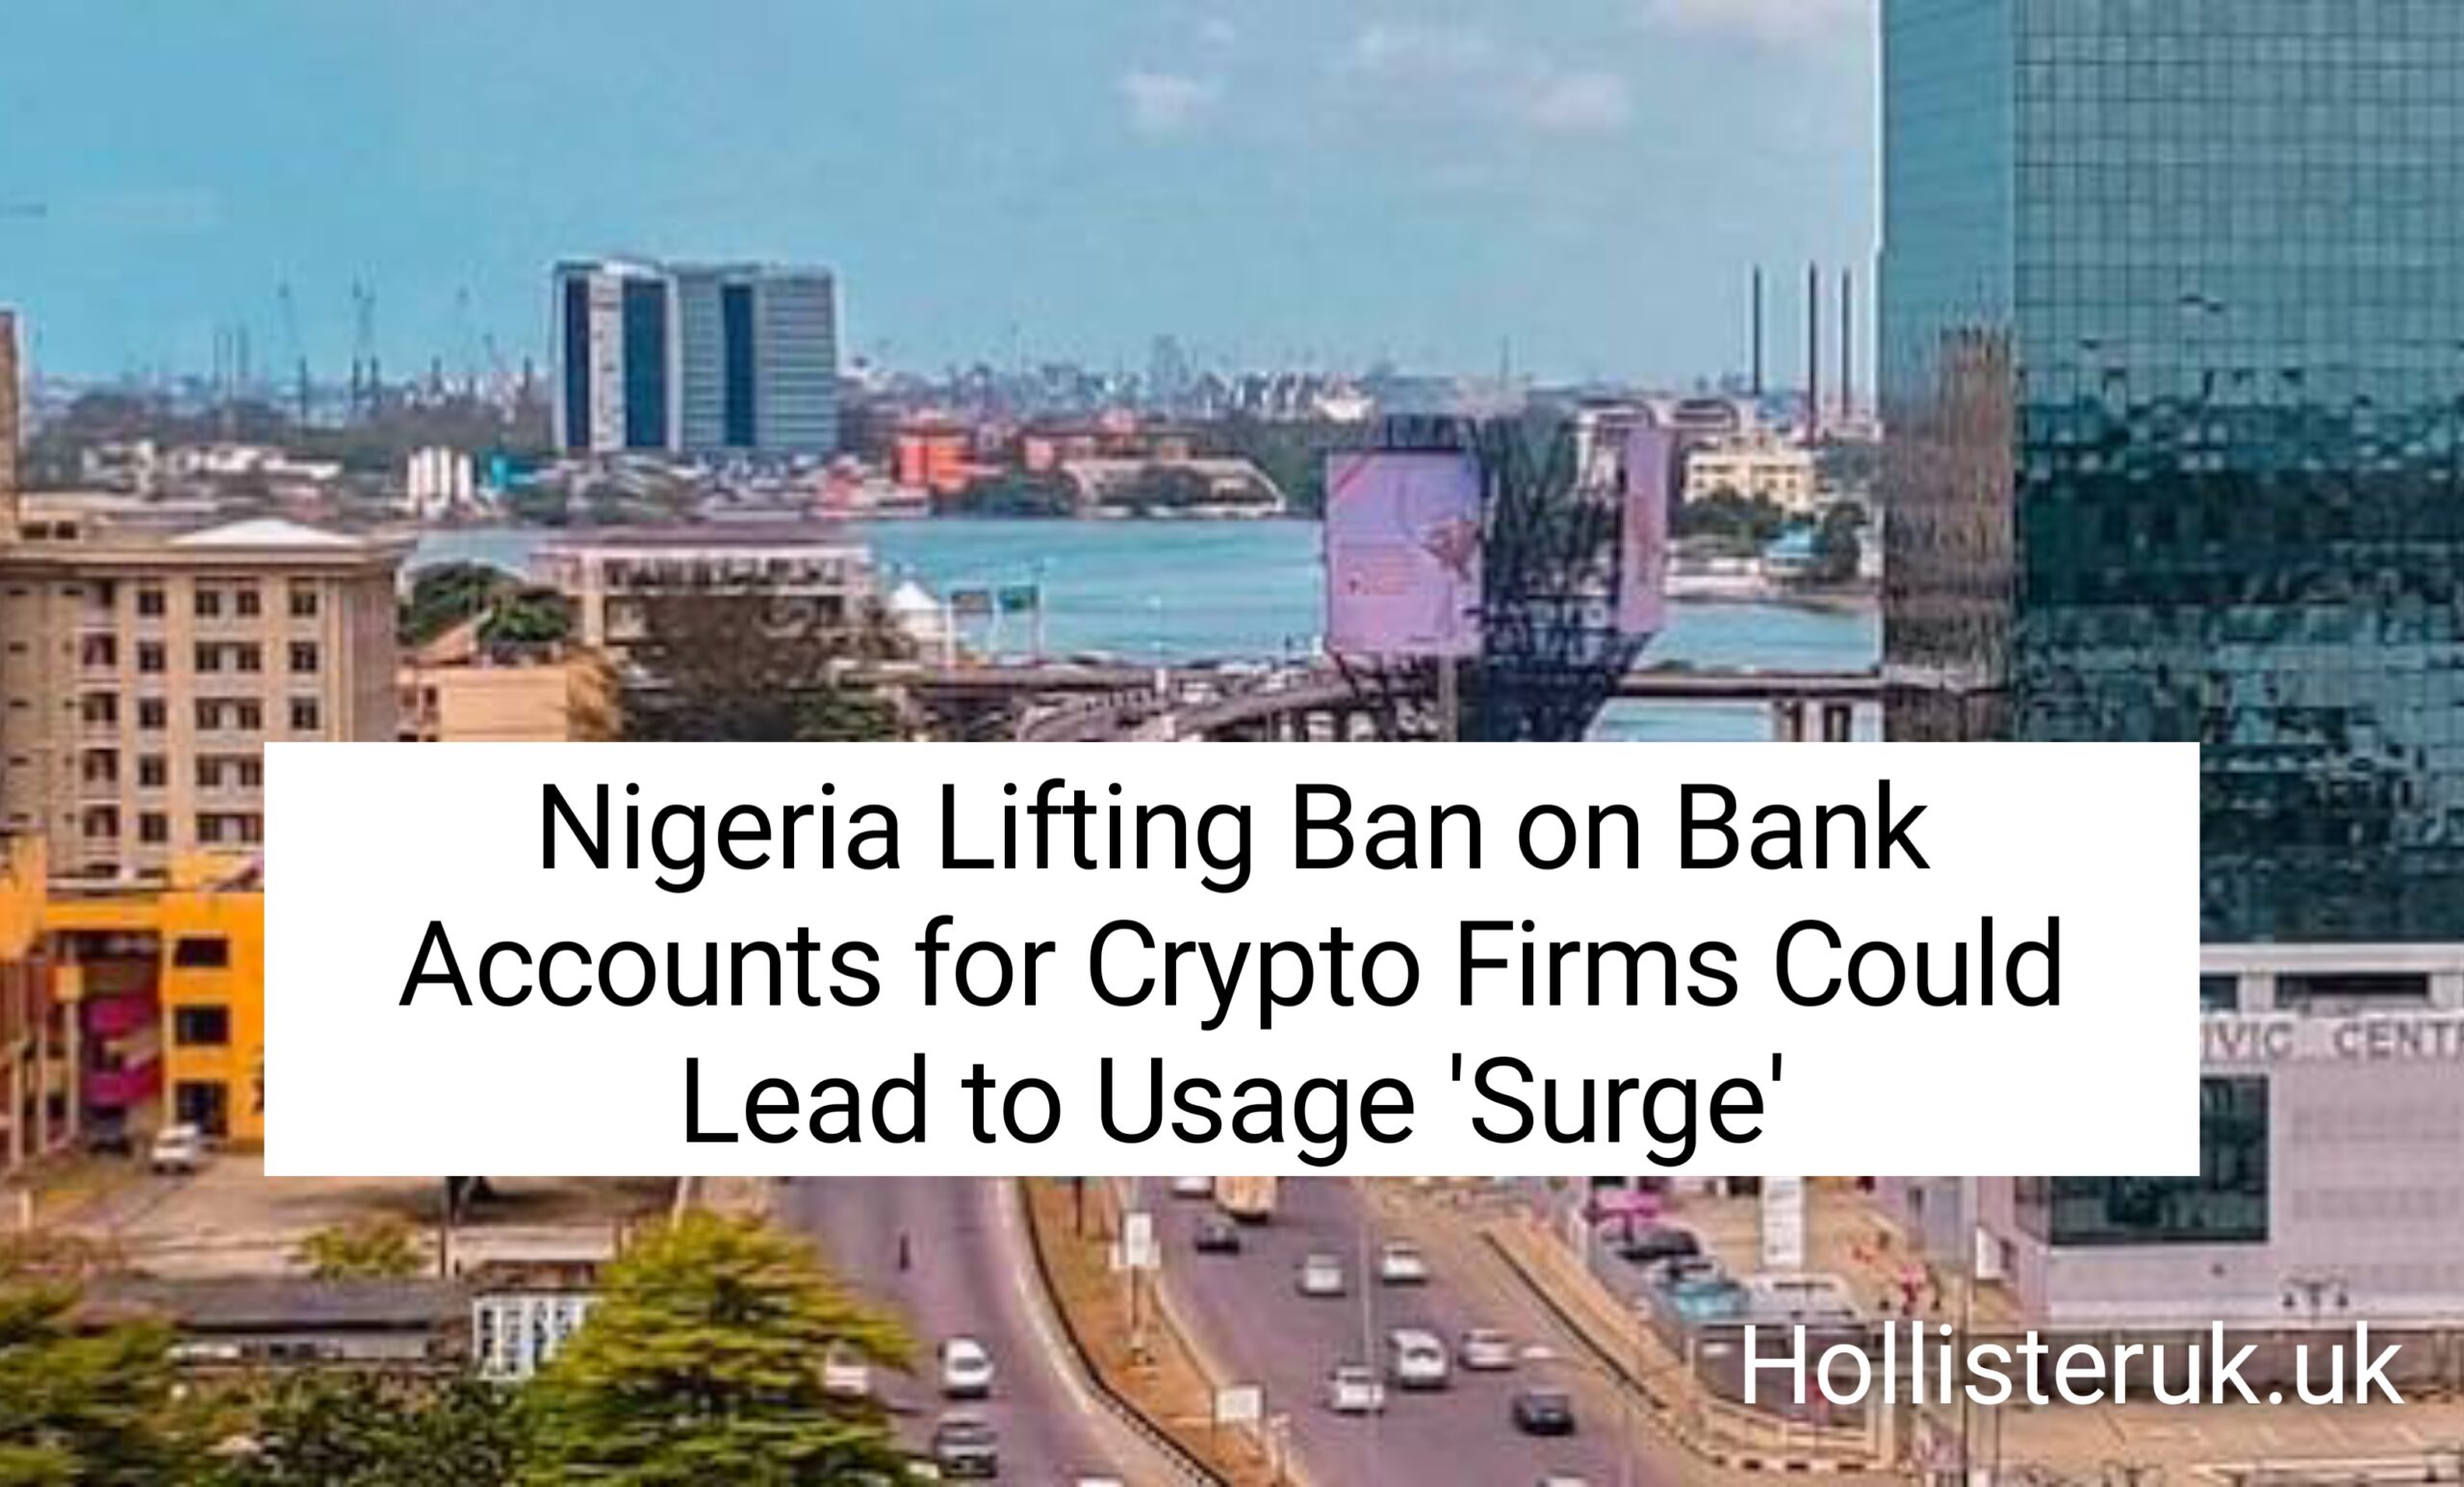 Nigeria Lifting Ban on Bank Accounts for Crypto Firms Could Lead to Usage 'Surge'